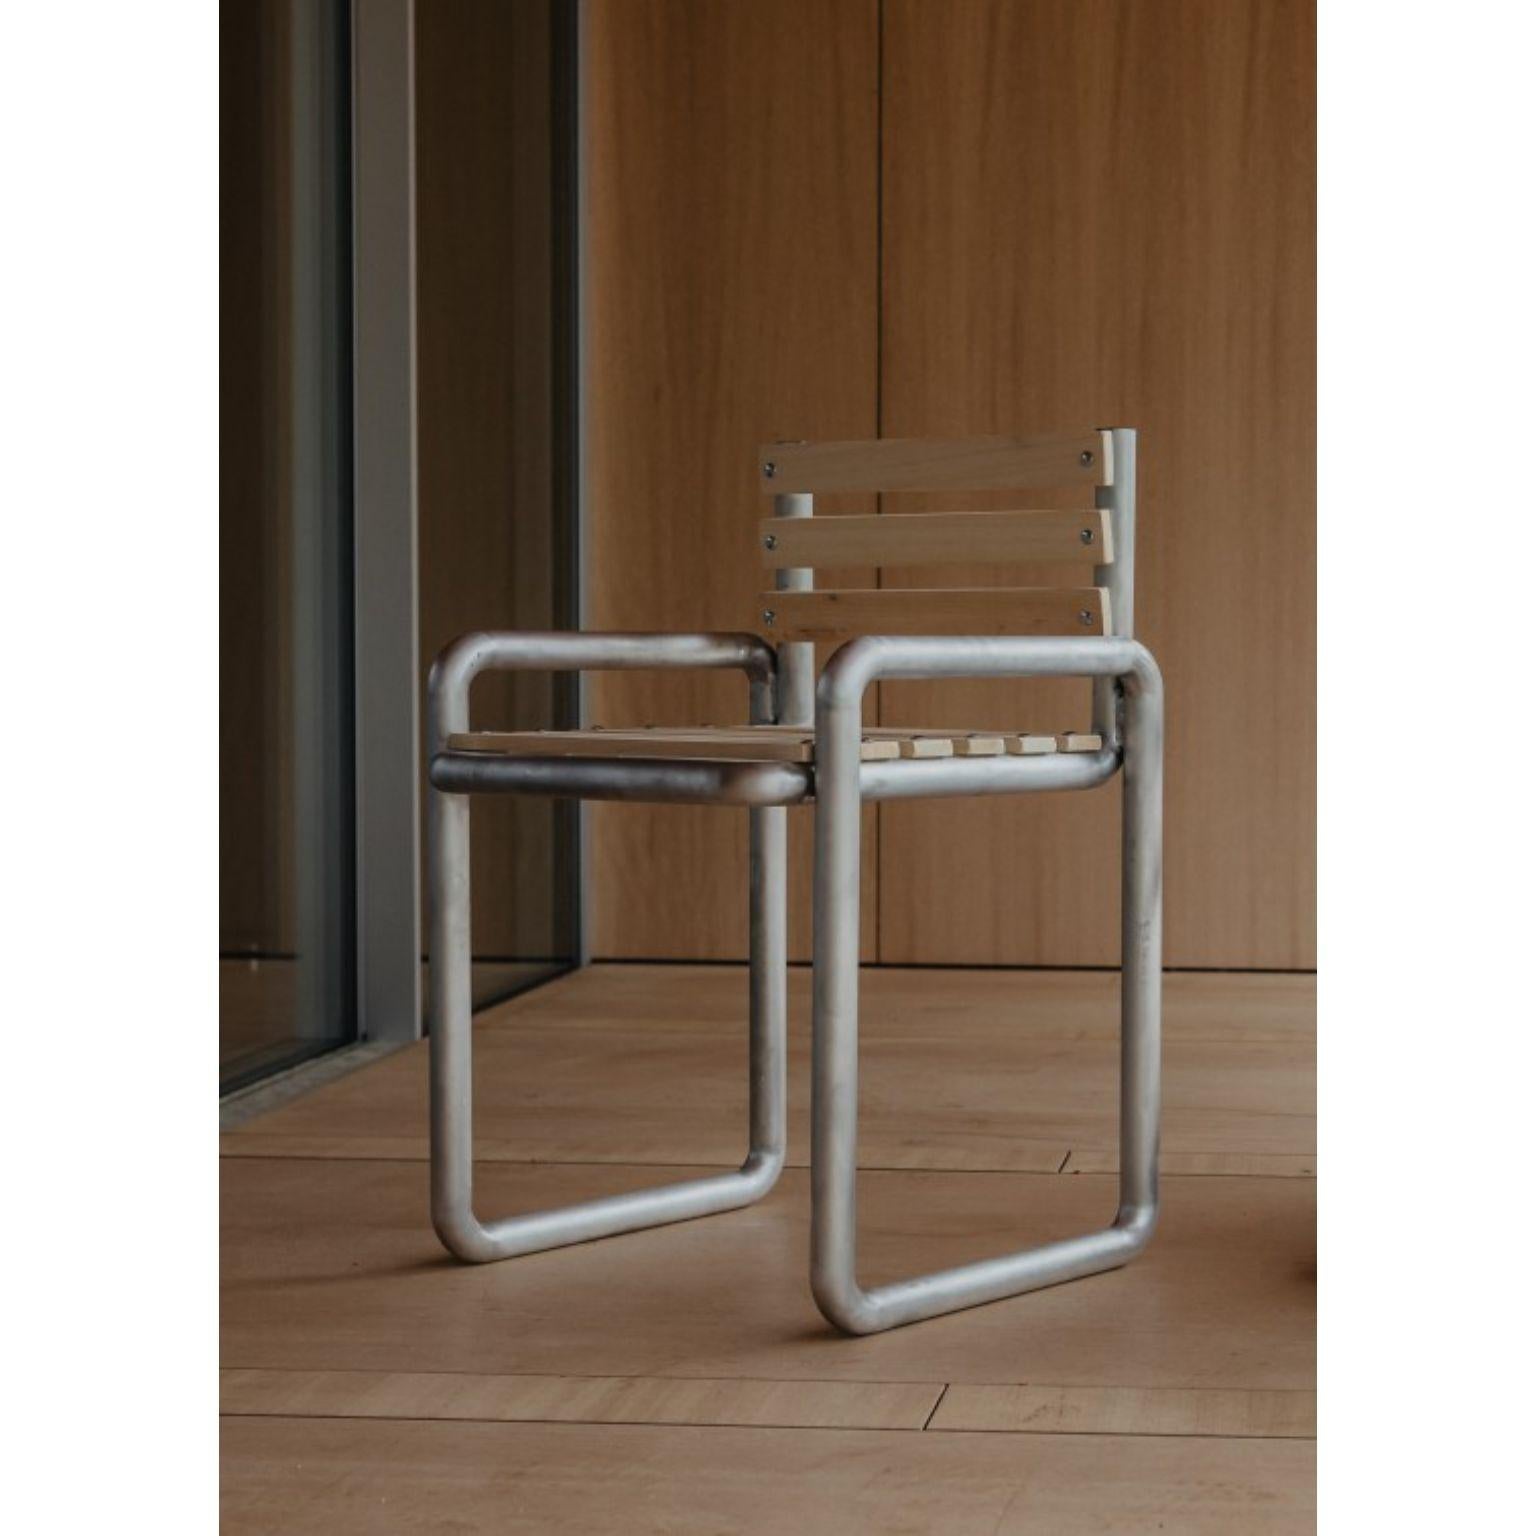 Aluminum Chair by Mylene Niedzialkowski
Dimensions: D 43 x H 83. SH 41 cm.
Materials: Aluminum and wood.

Basic shapes associated with masculine airs, Chair is all aluminum tubes and light local wood.  For an outside use as inside, it can be